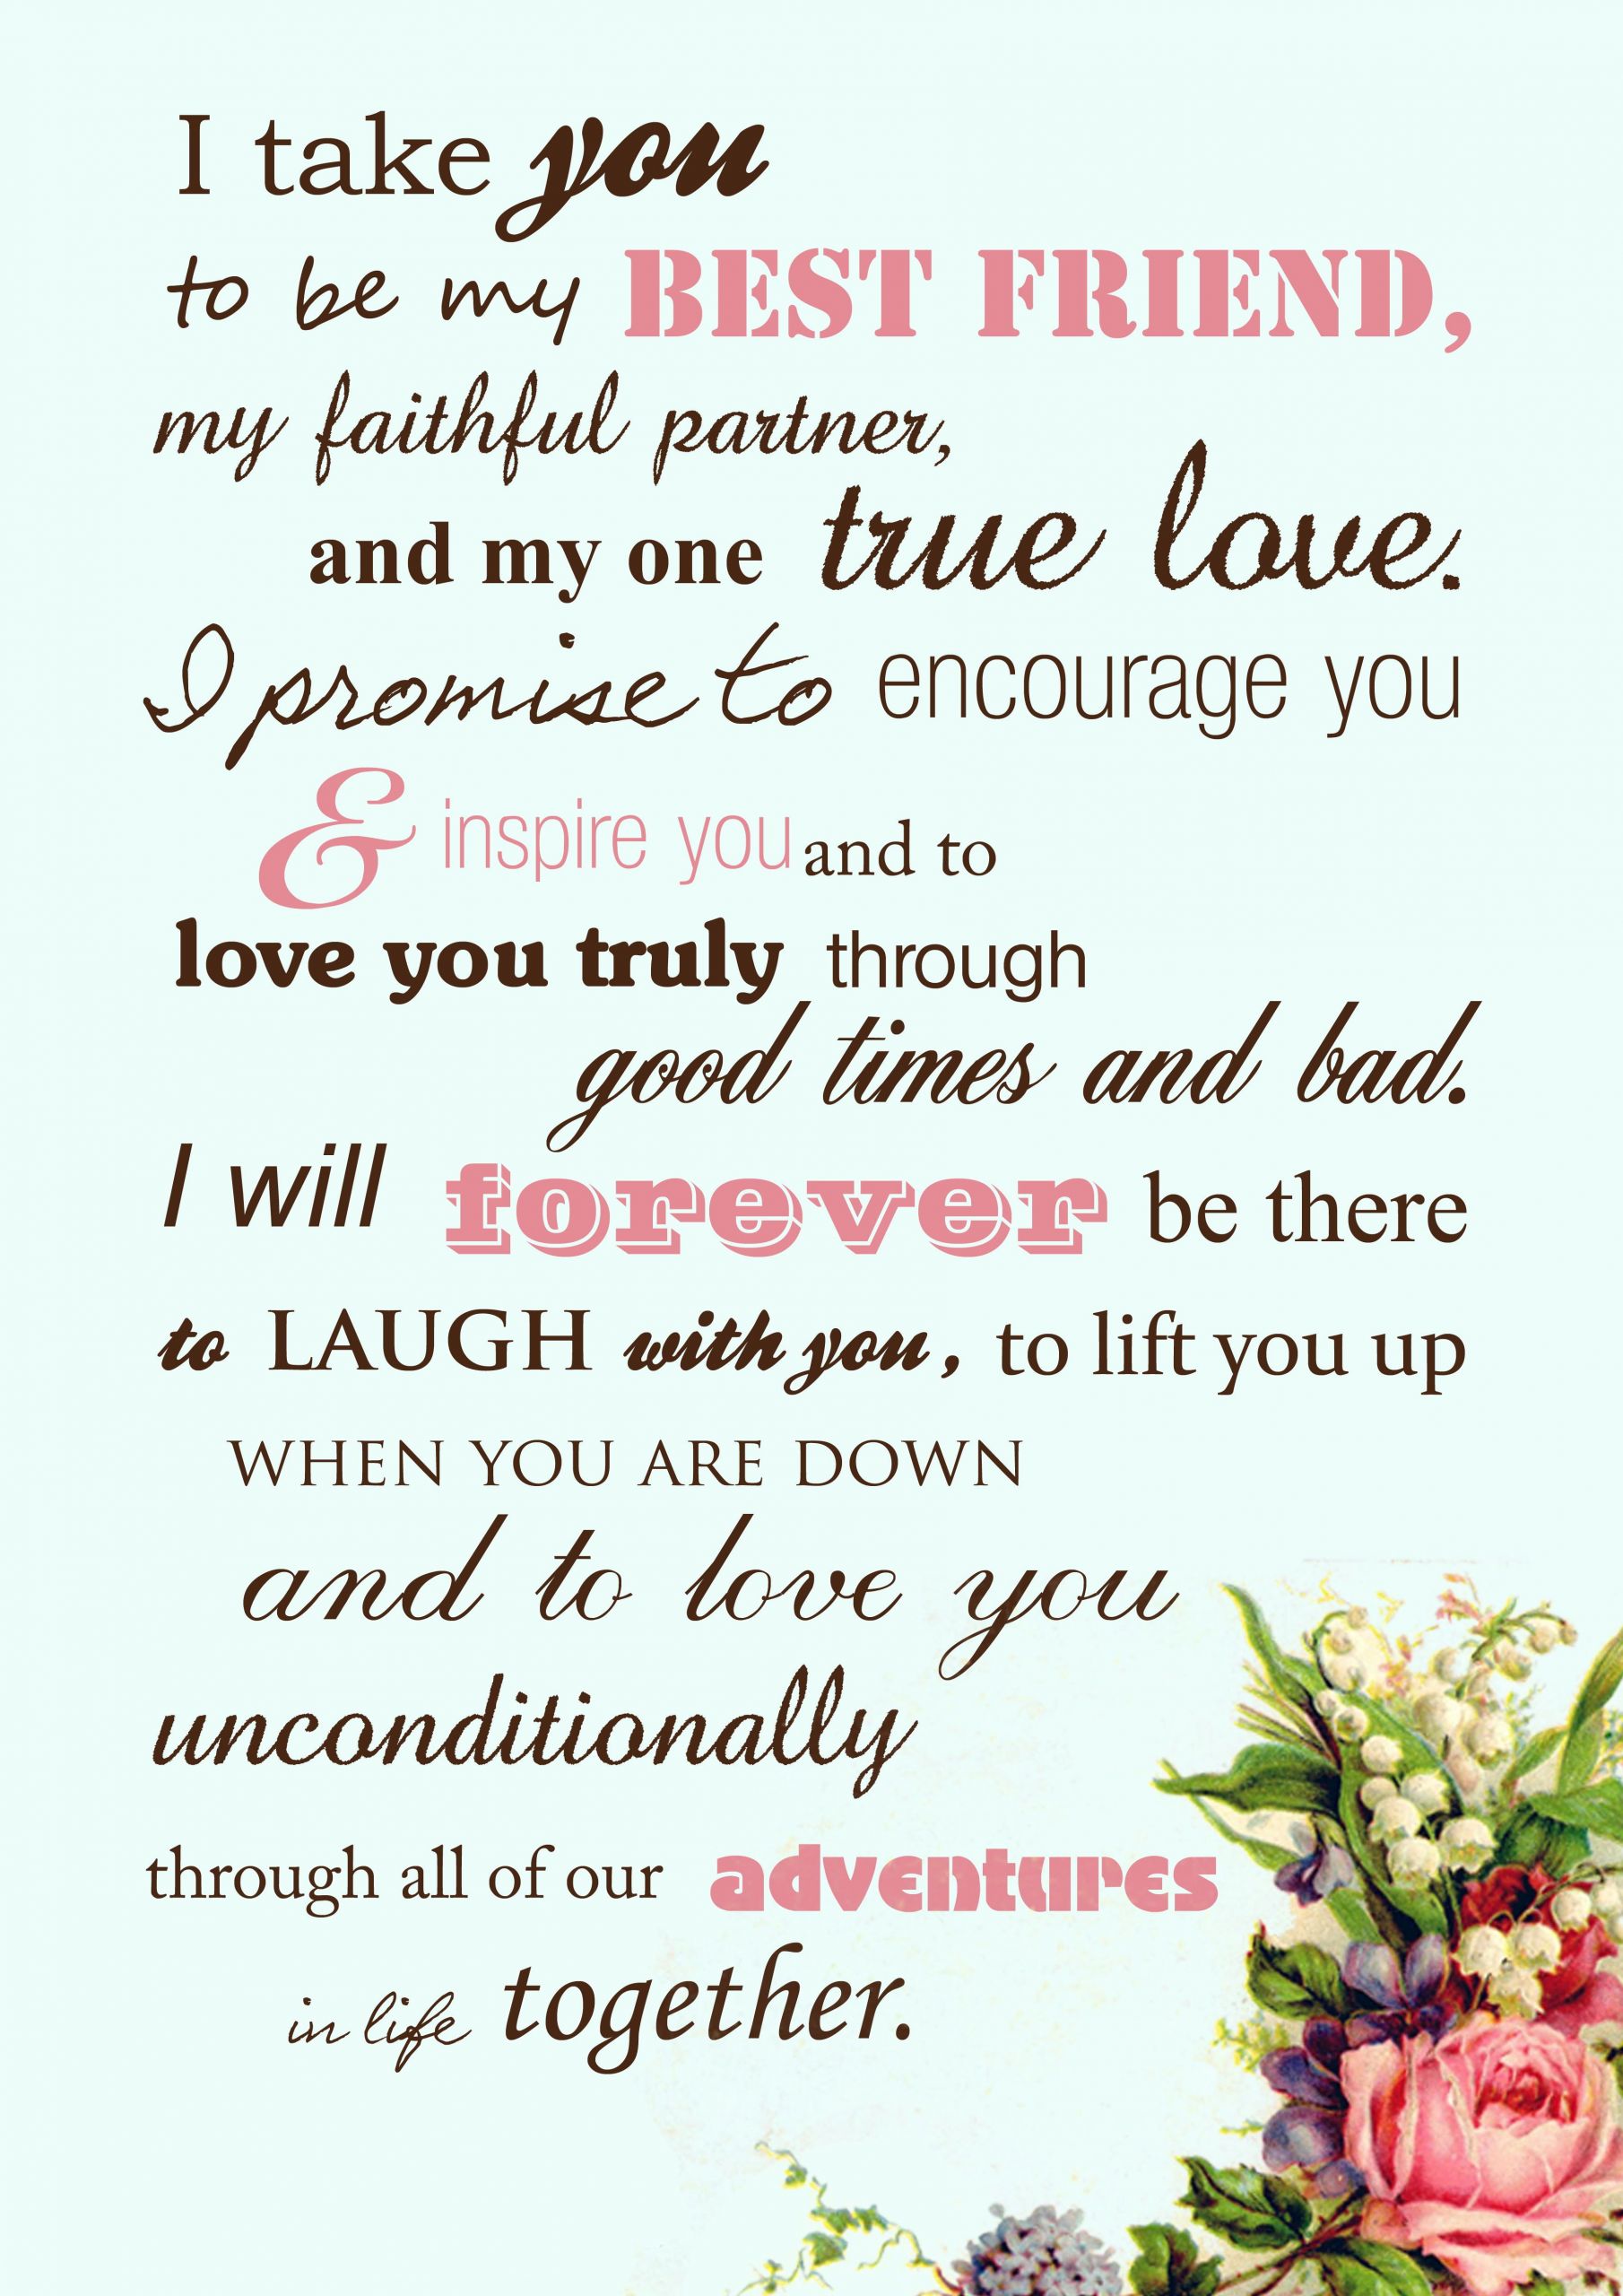 Wedding Ceremony Vows
 Beautiful wedding vows instead of the traditional by the